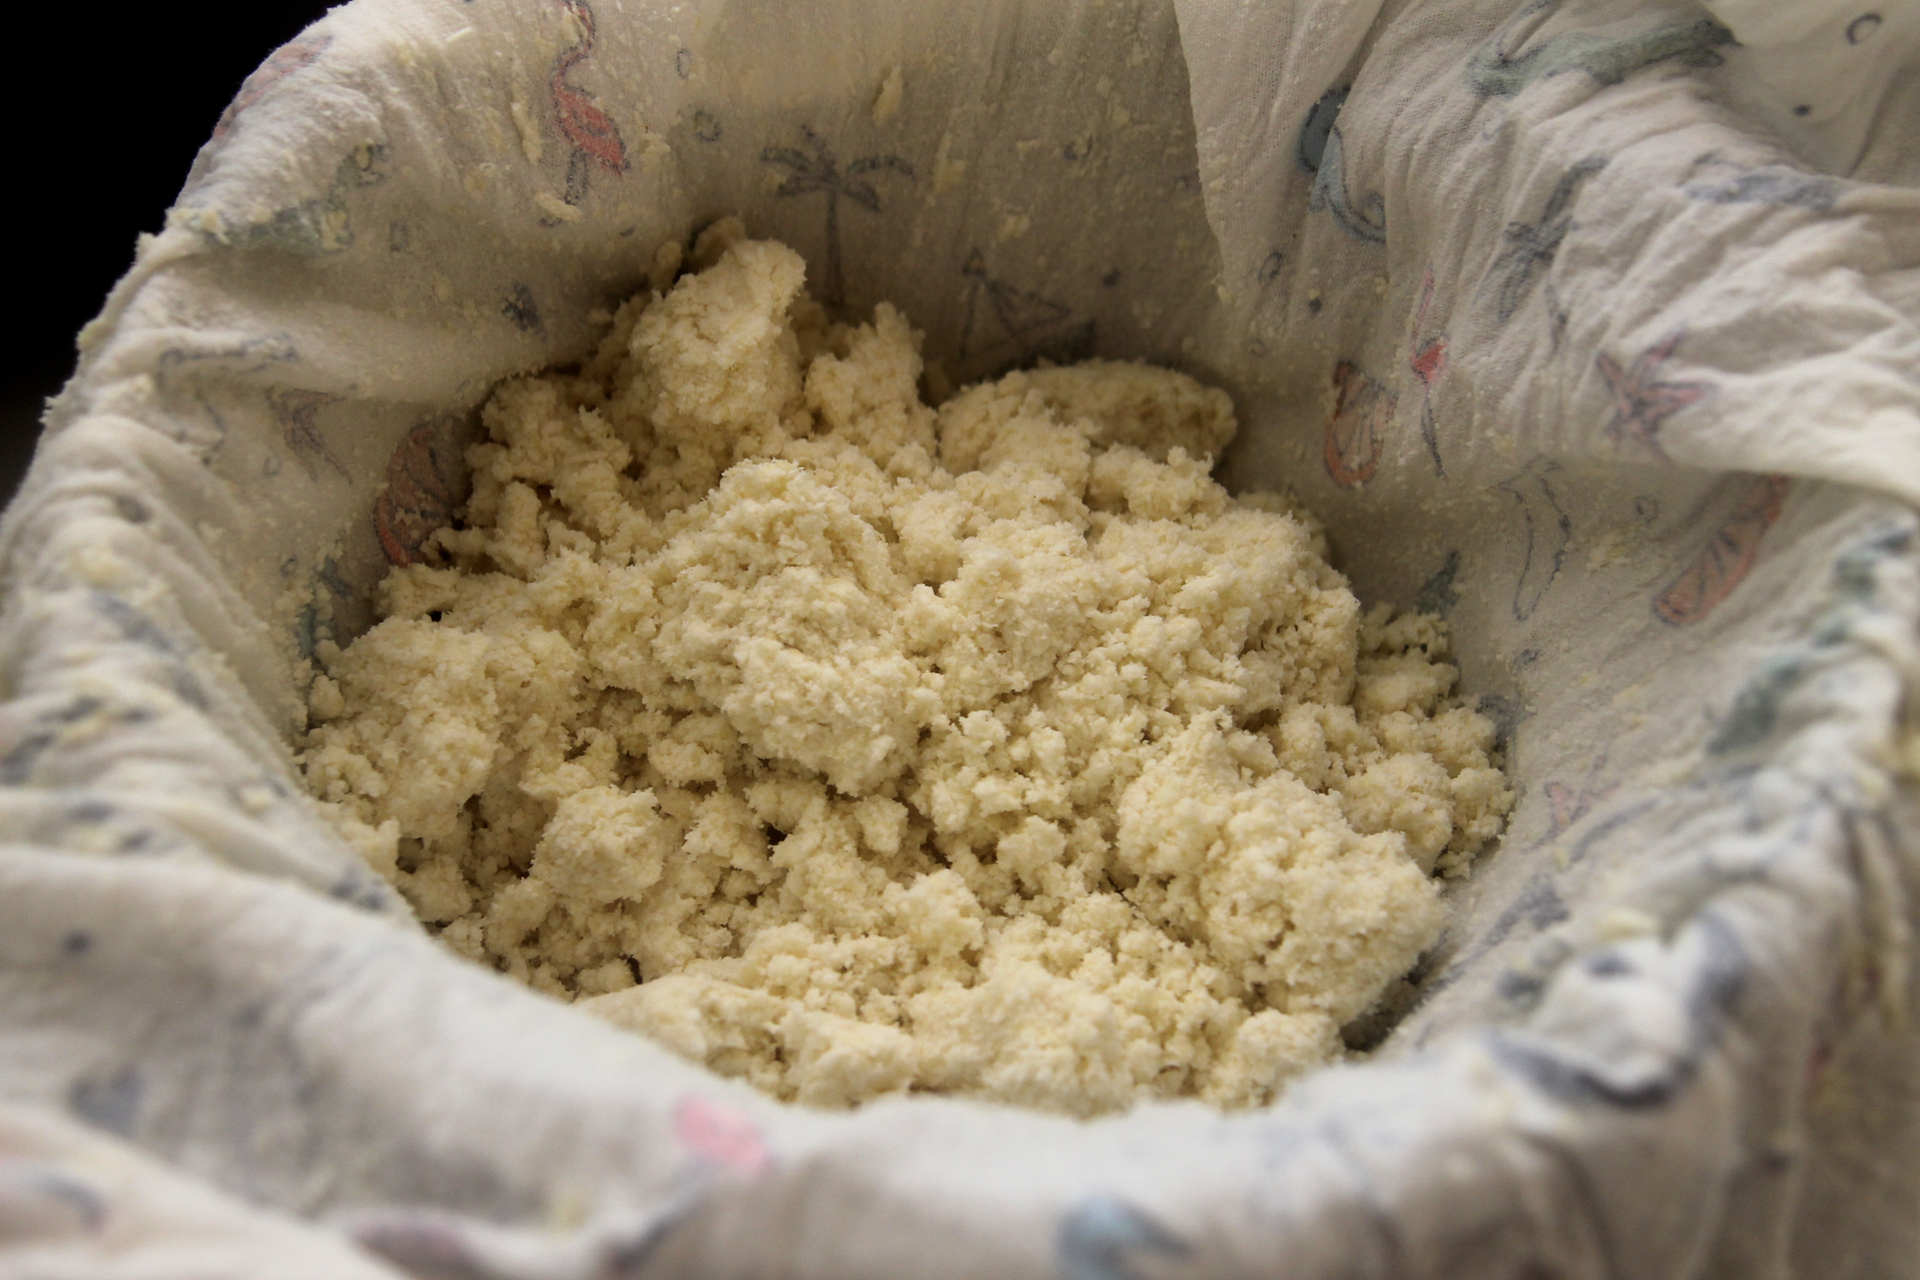 After draining, you’ll end up with okara, or soybean pulp, and plenty of fresh soy milk.